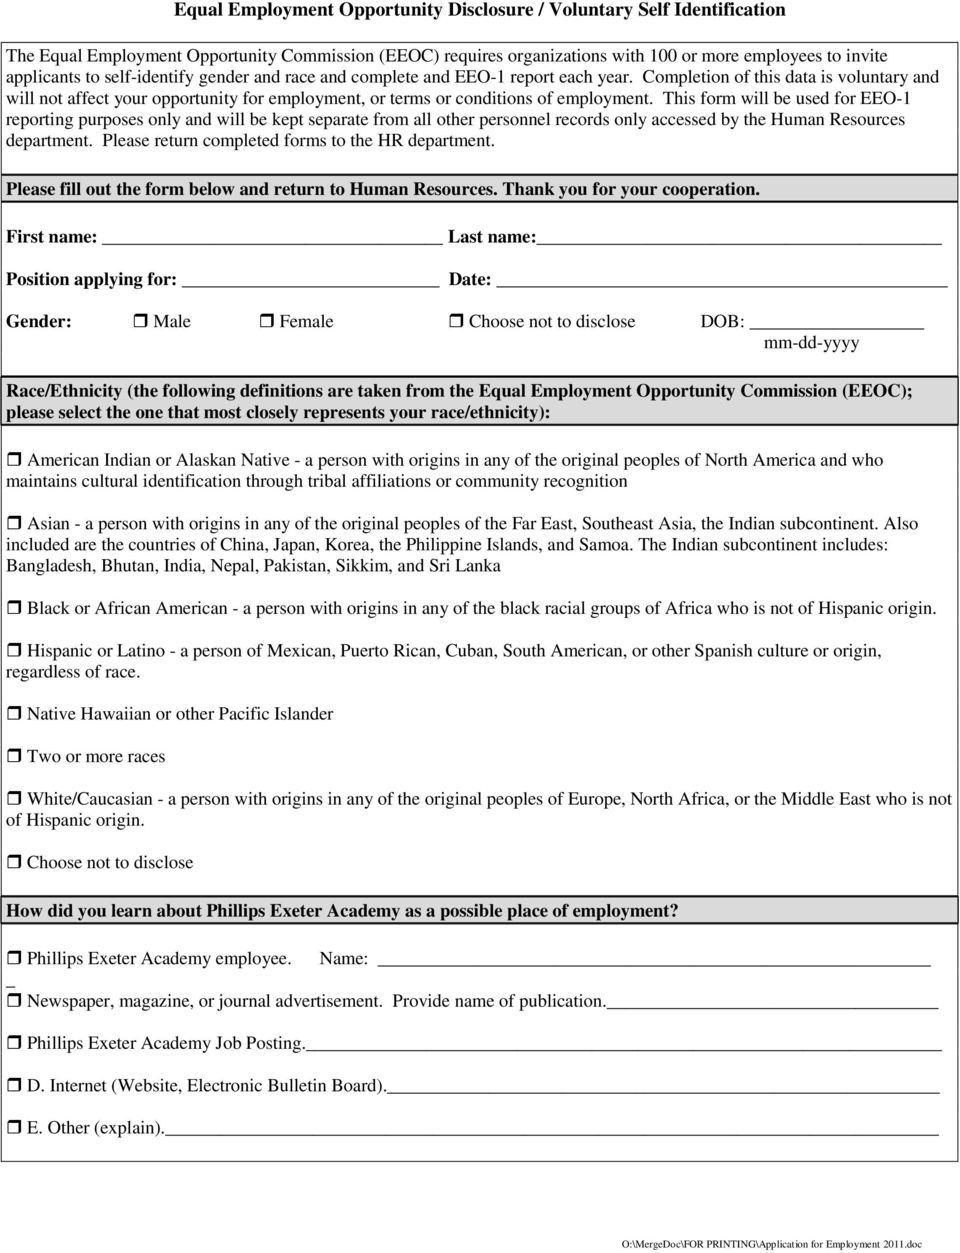 This form will be used for EEO-1 reporting purposes only and will be kept separate from all other personnel records only accessed by the Human Resources department.